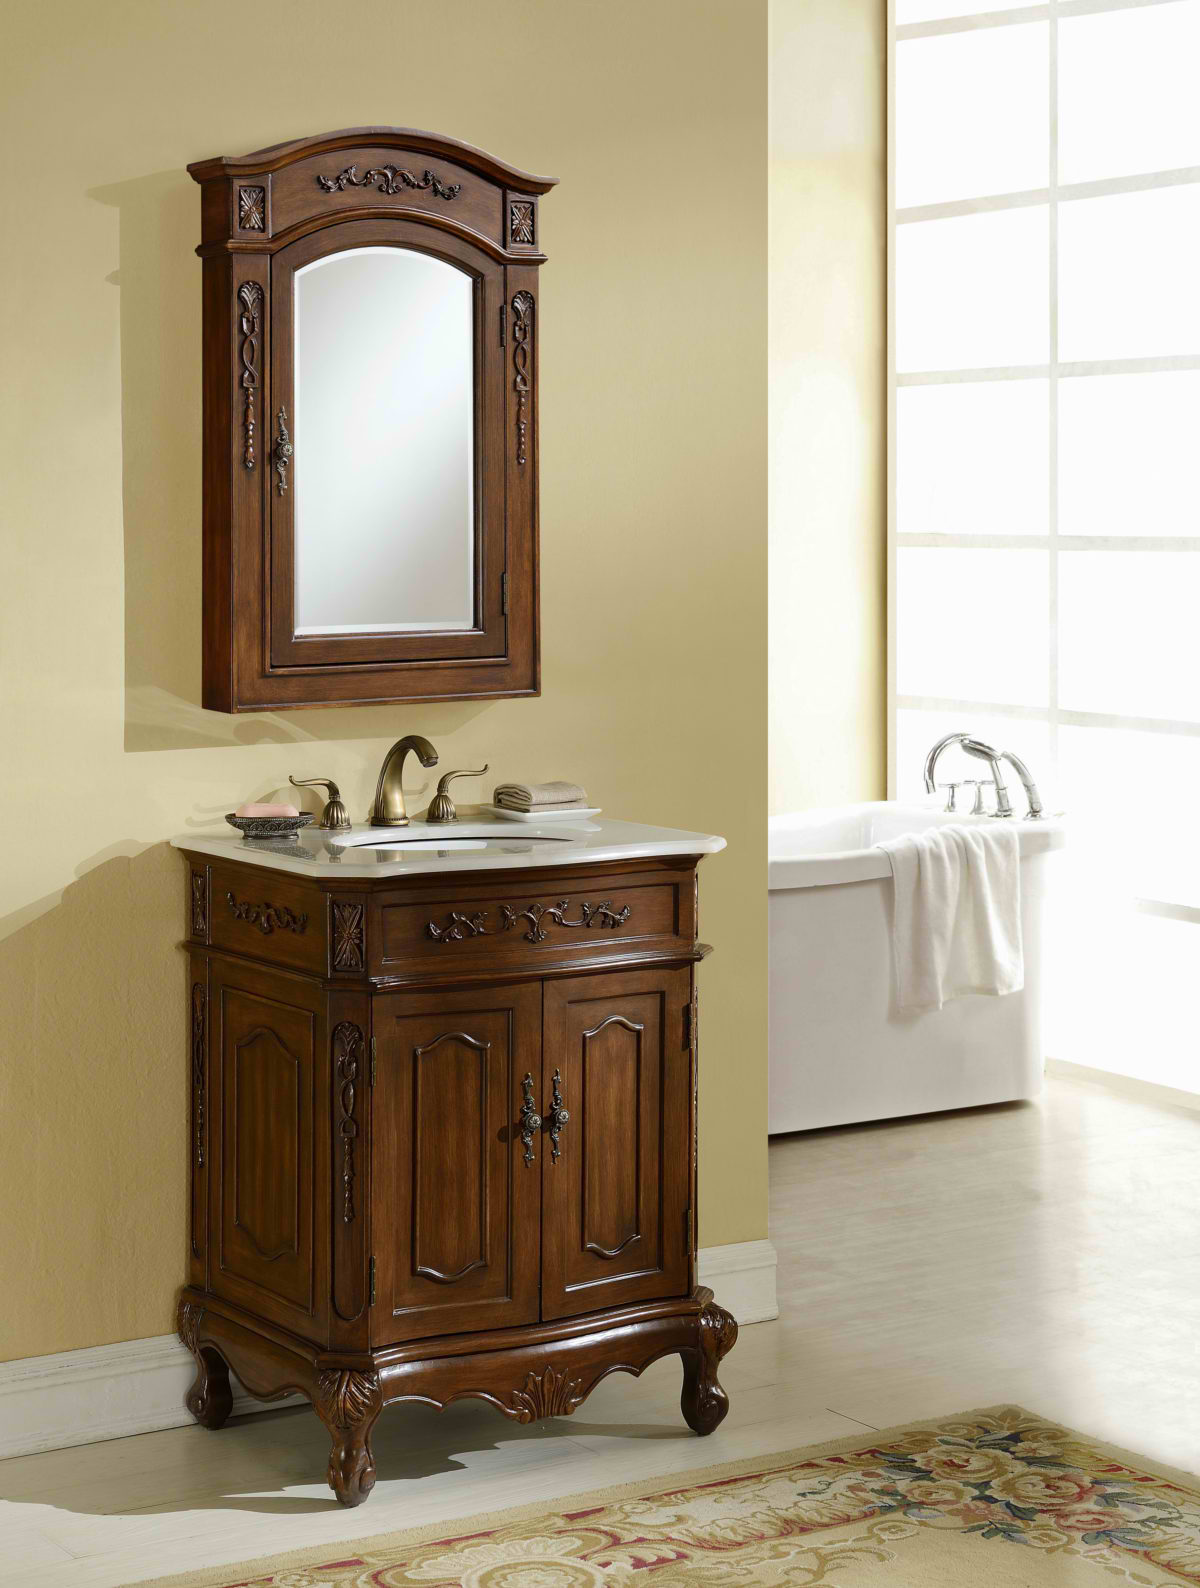 27" Antique Deep Chestnut Finish Vanity with Mirror, Med Cab, and Linen Cabinet Options